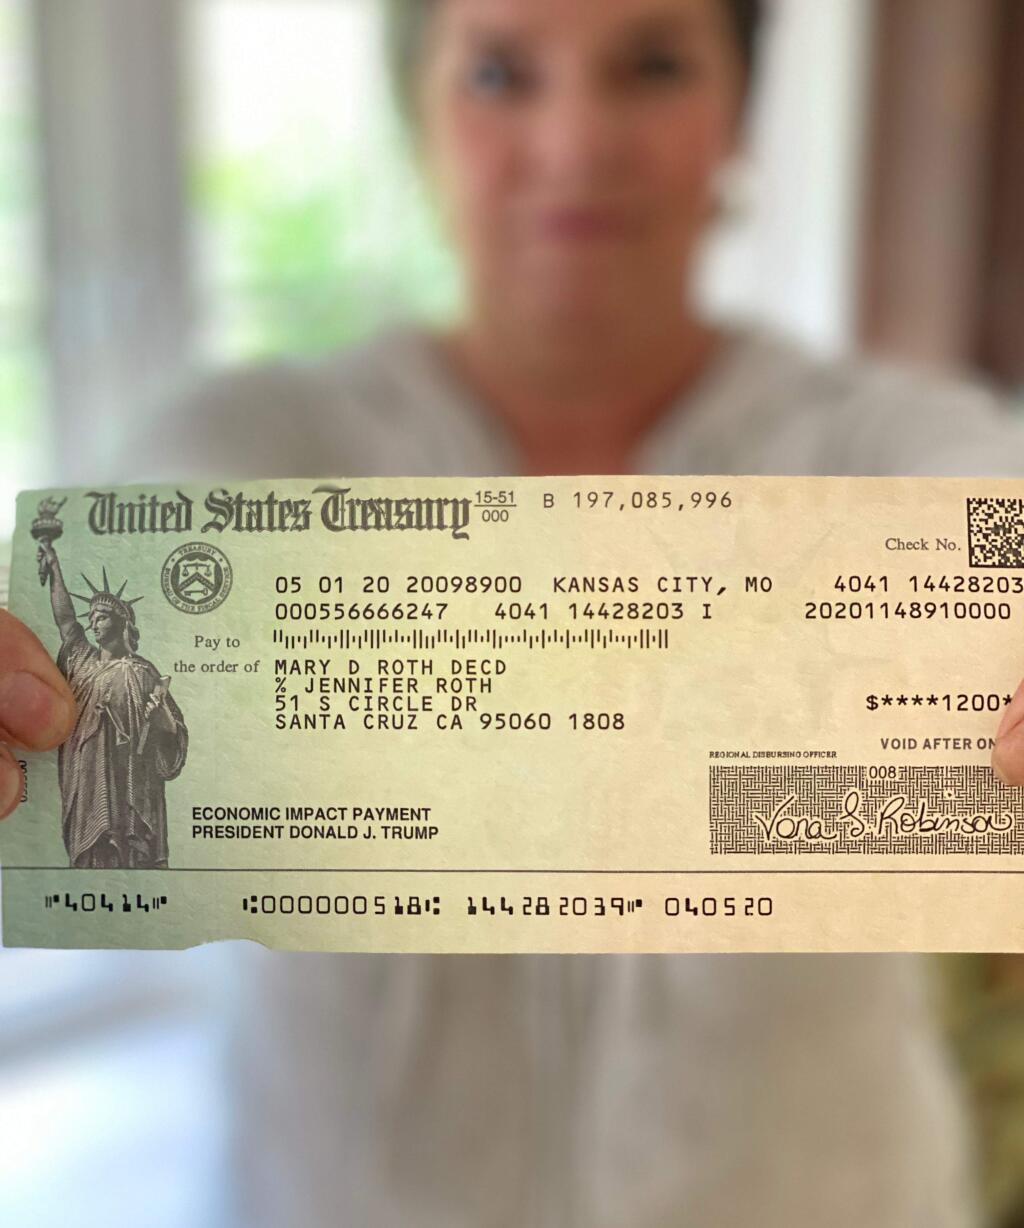 Reporter Kate Williams' sister displays the $1,200 stimulus check sent to their mother, who died in 2018. Behind her name is the abreviation 'decd,' indicating that the IRS had recorded her death.